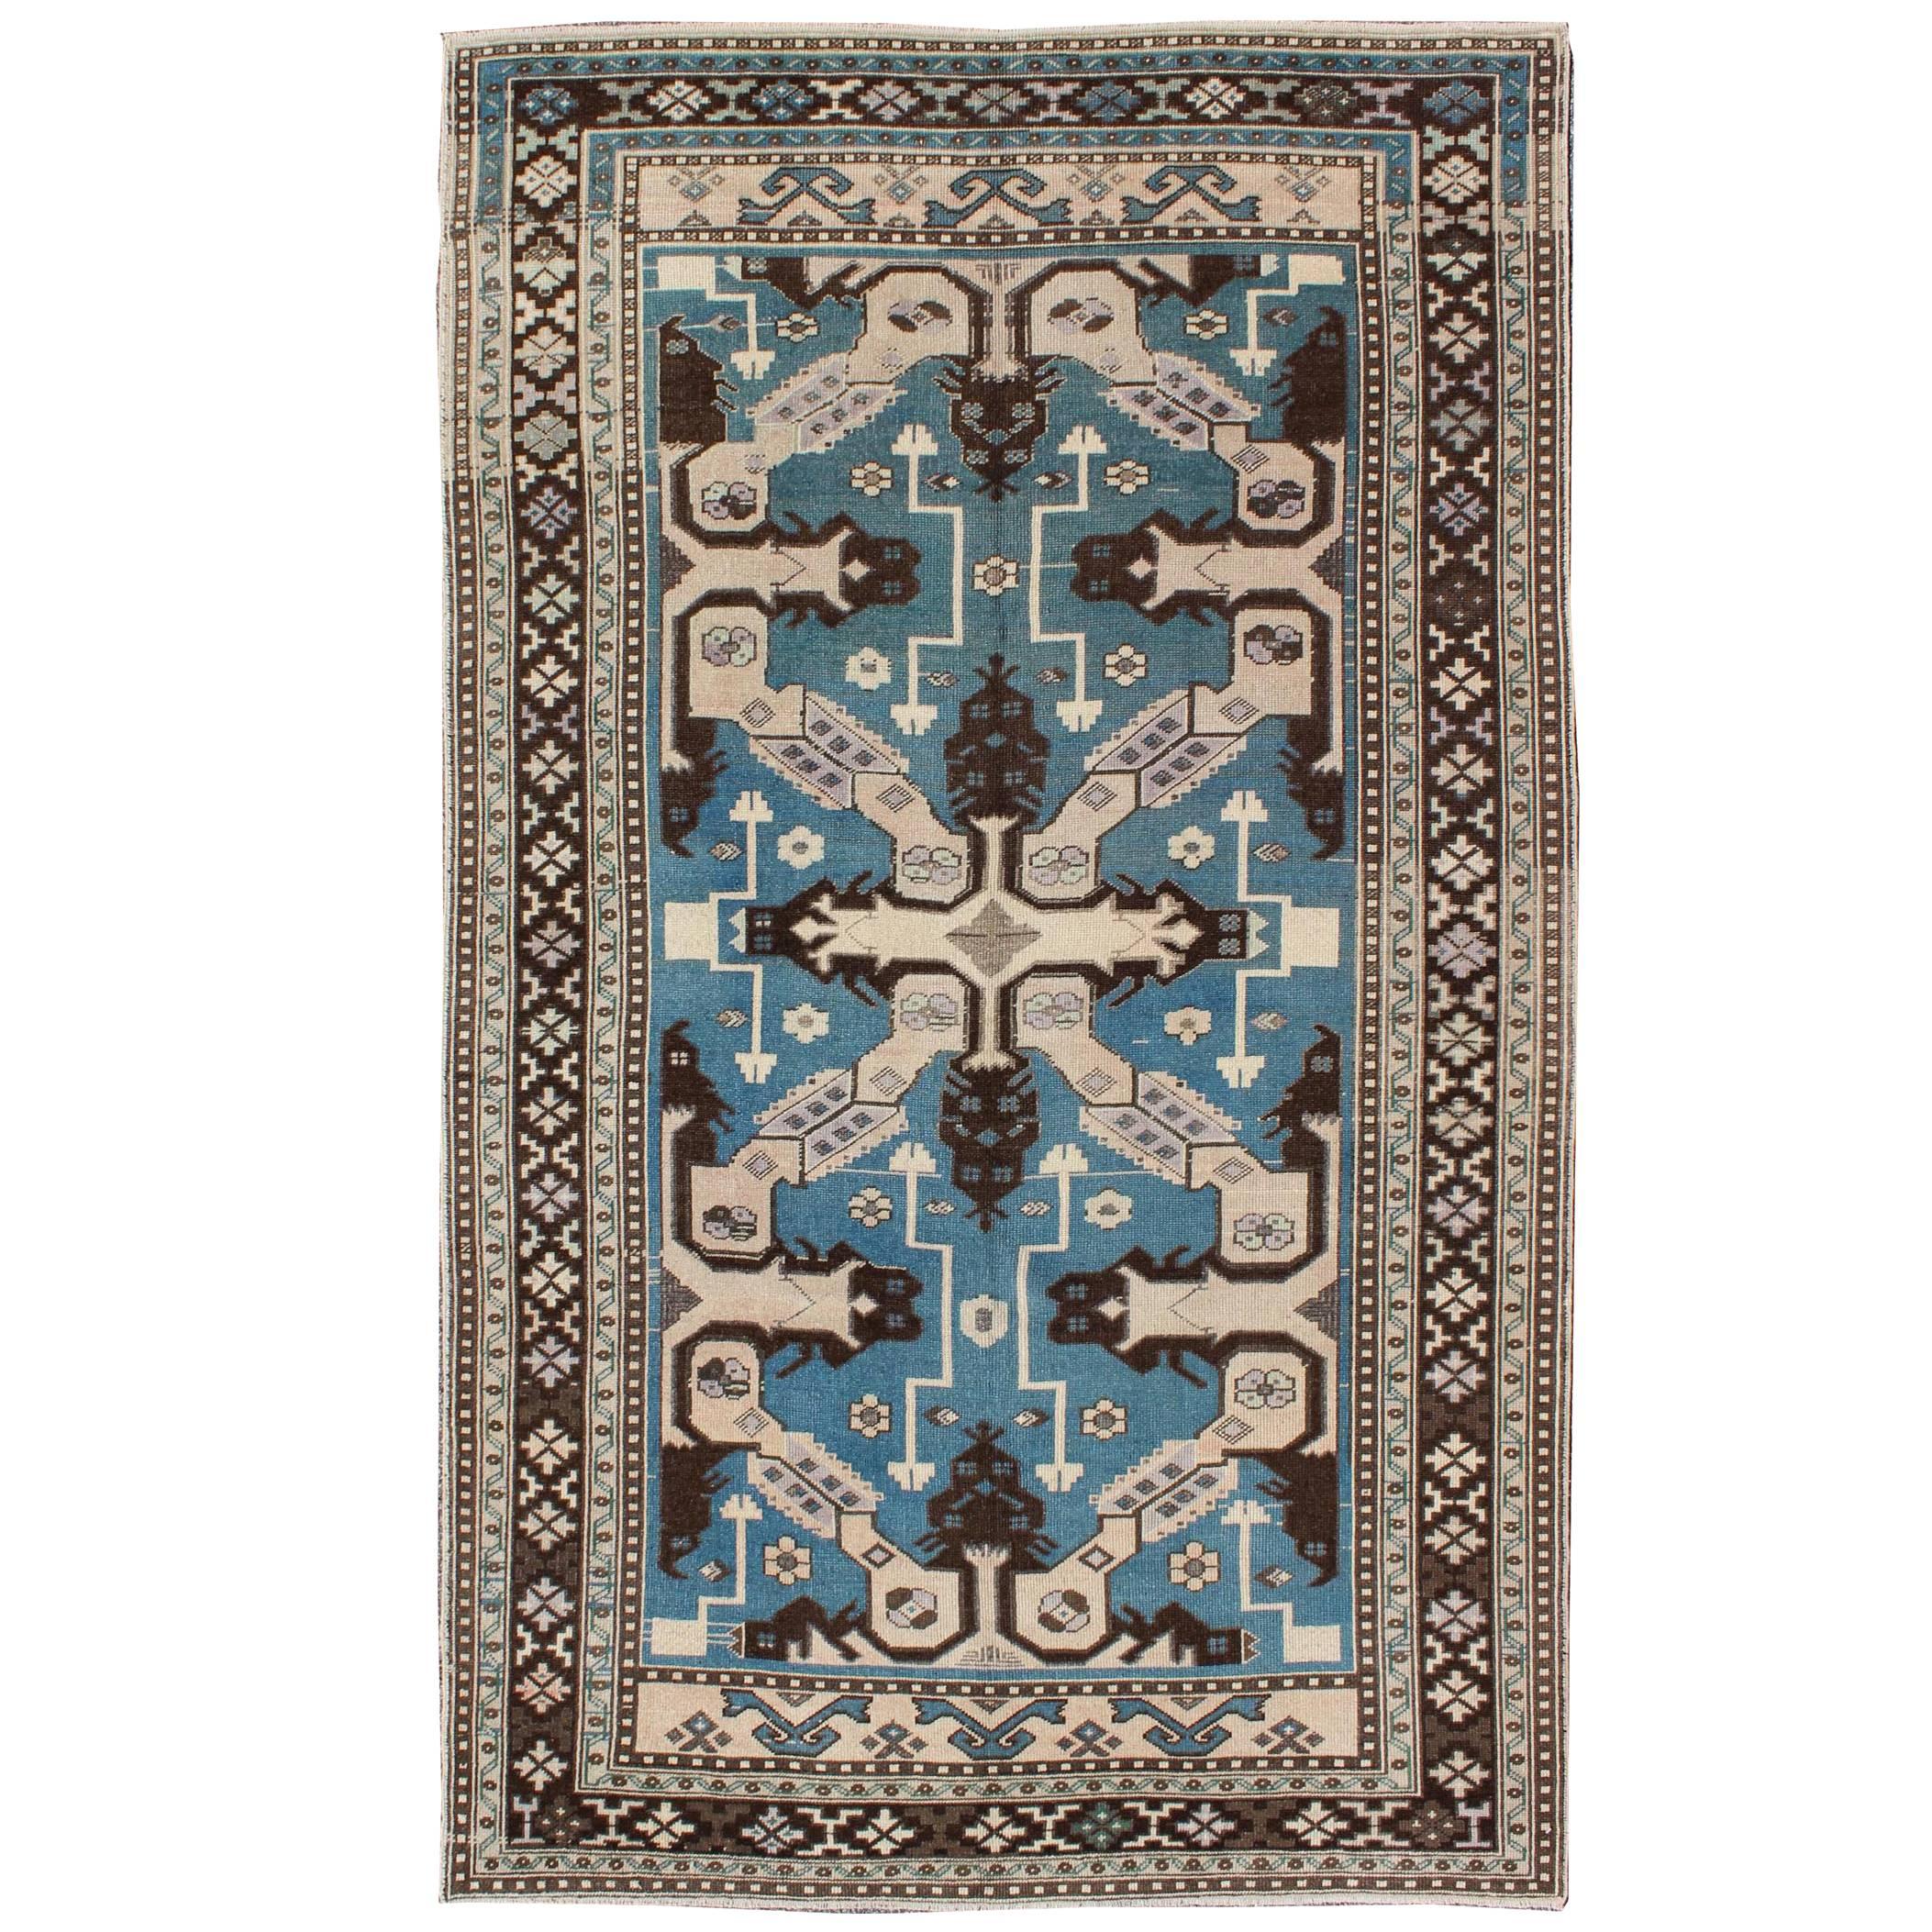 Vintage Turkish Rug with Unique Steel Blue, Medium Blue and Brown Colors